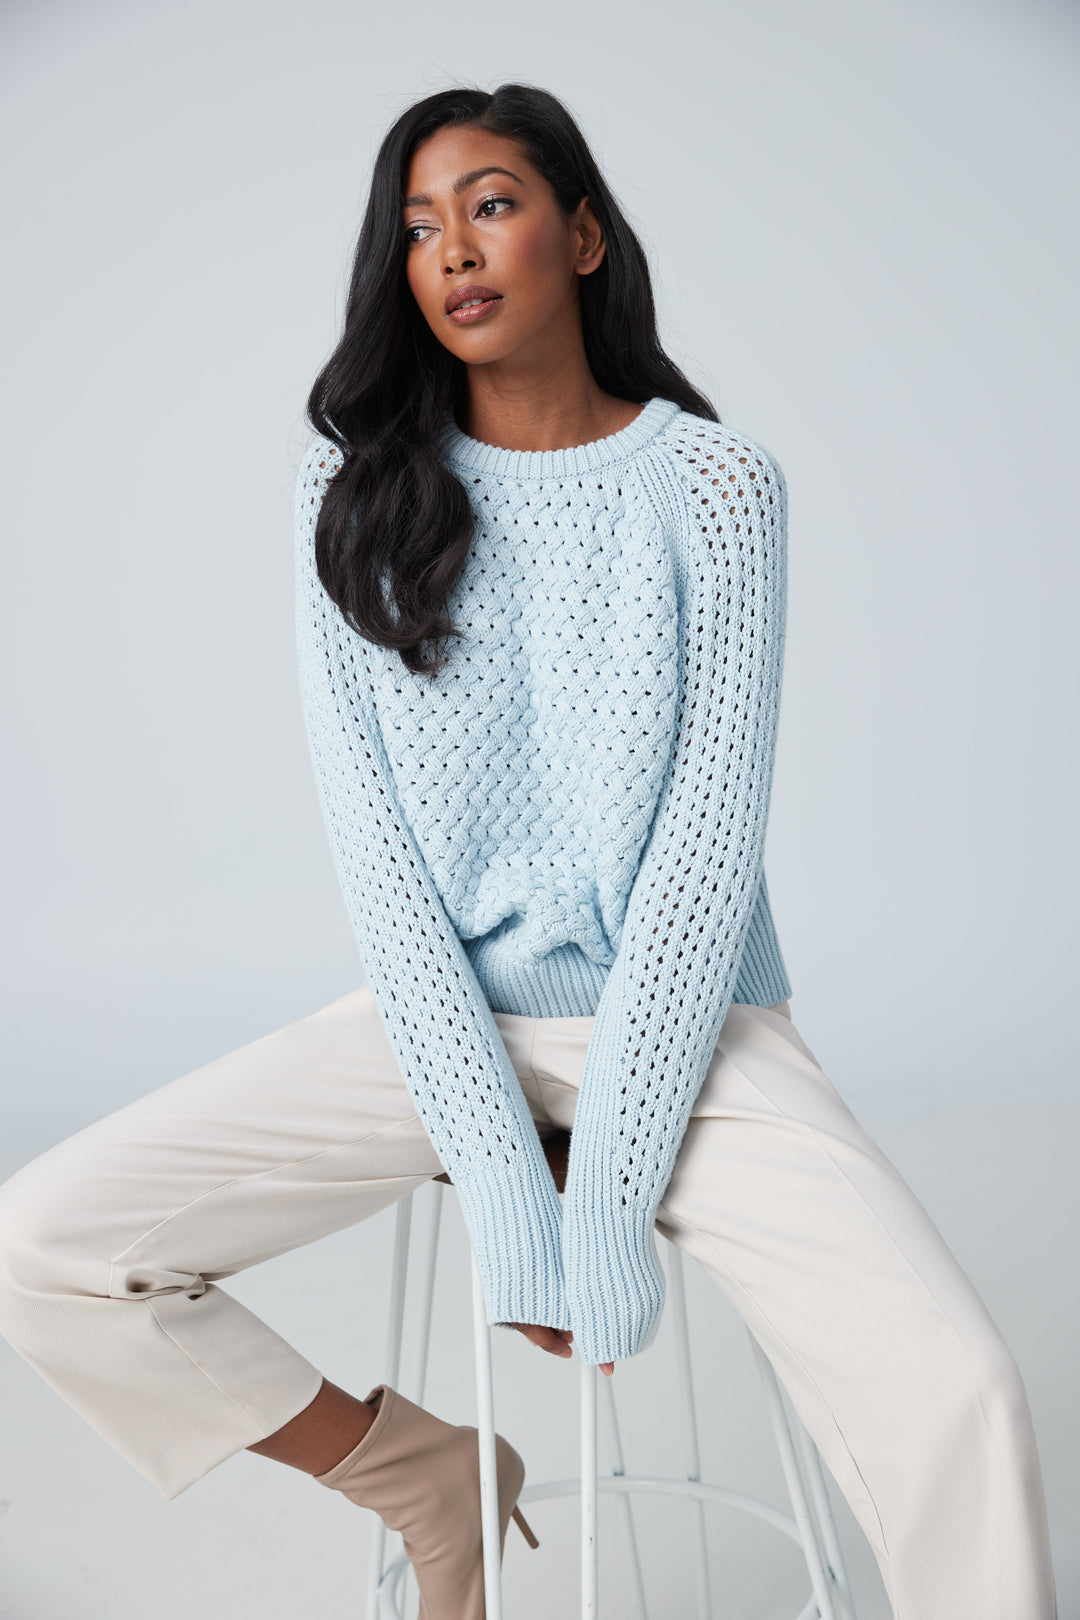 Batwing sleeved cardigan – Morneault's Stackpole Moore Tryon